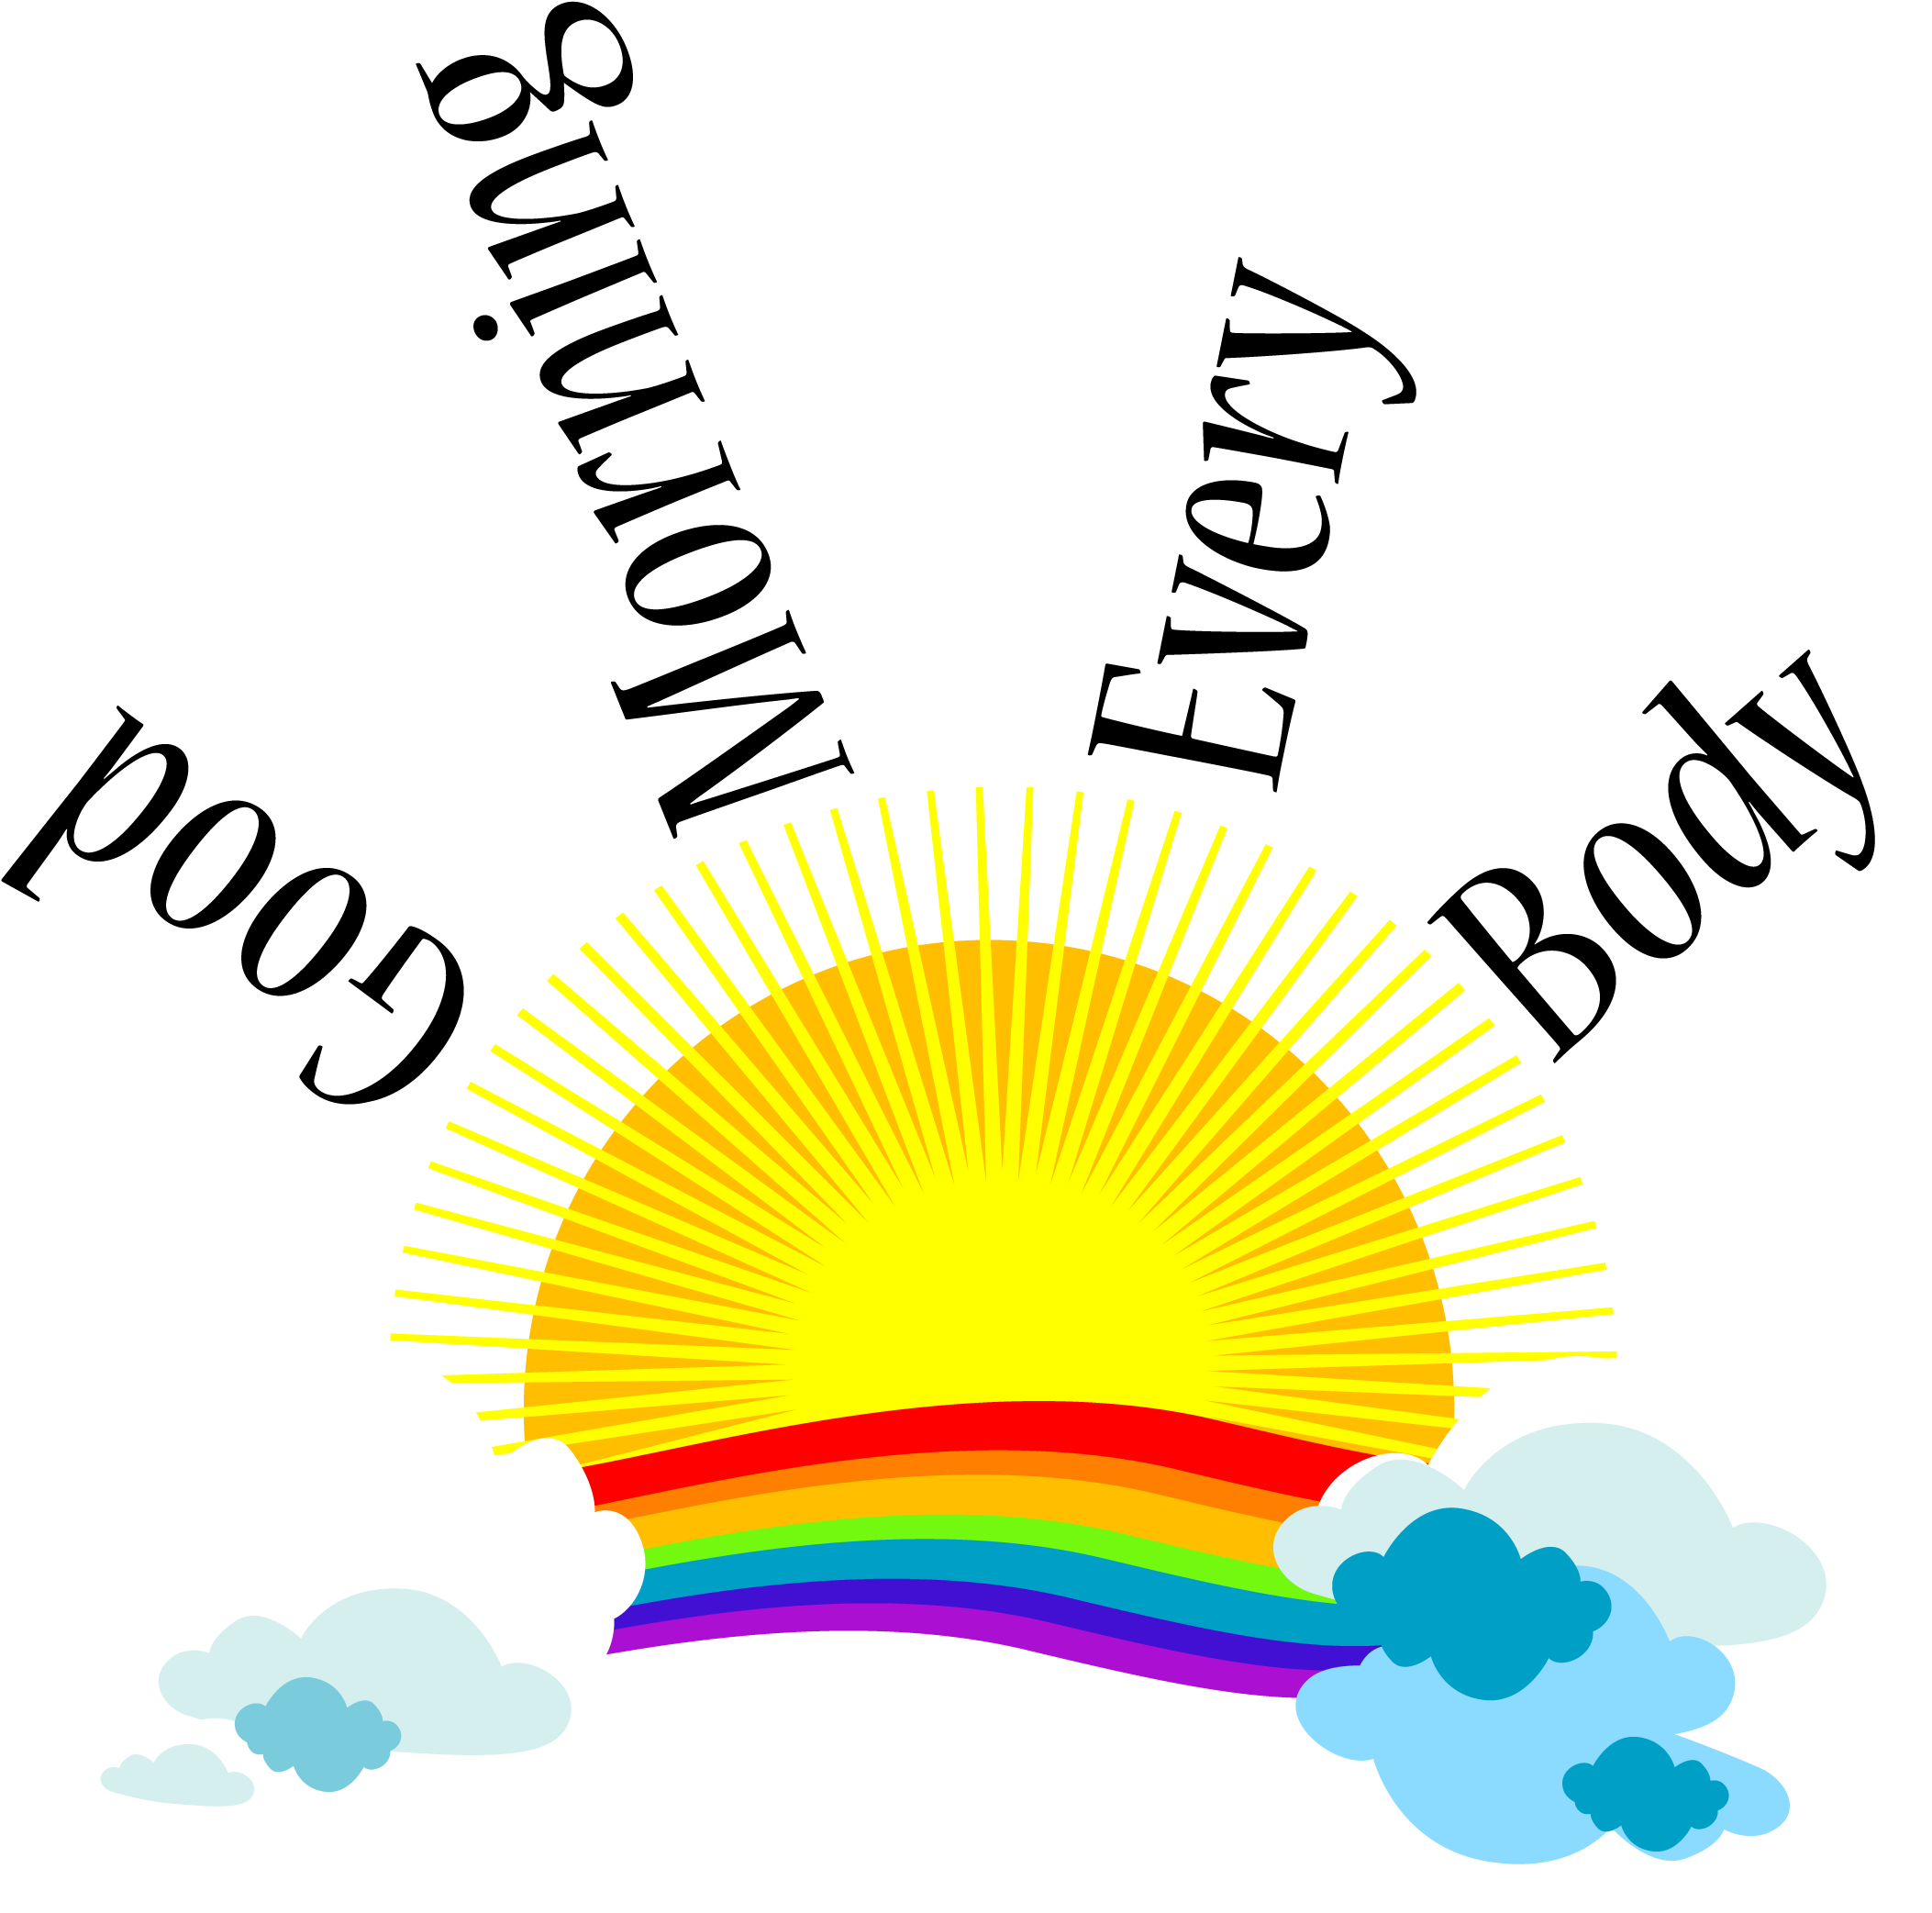 A Sun And Clouds With A Rainbow